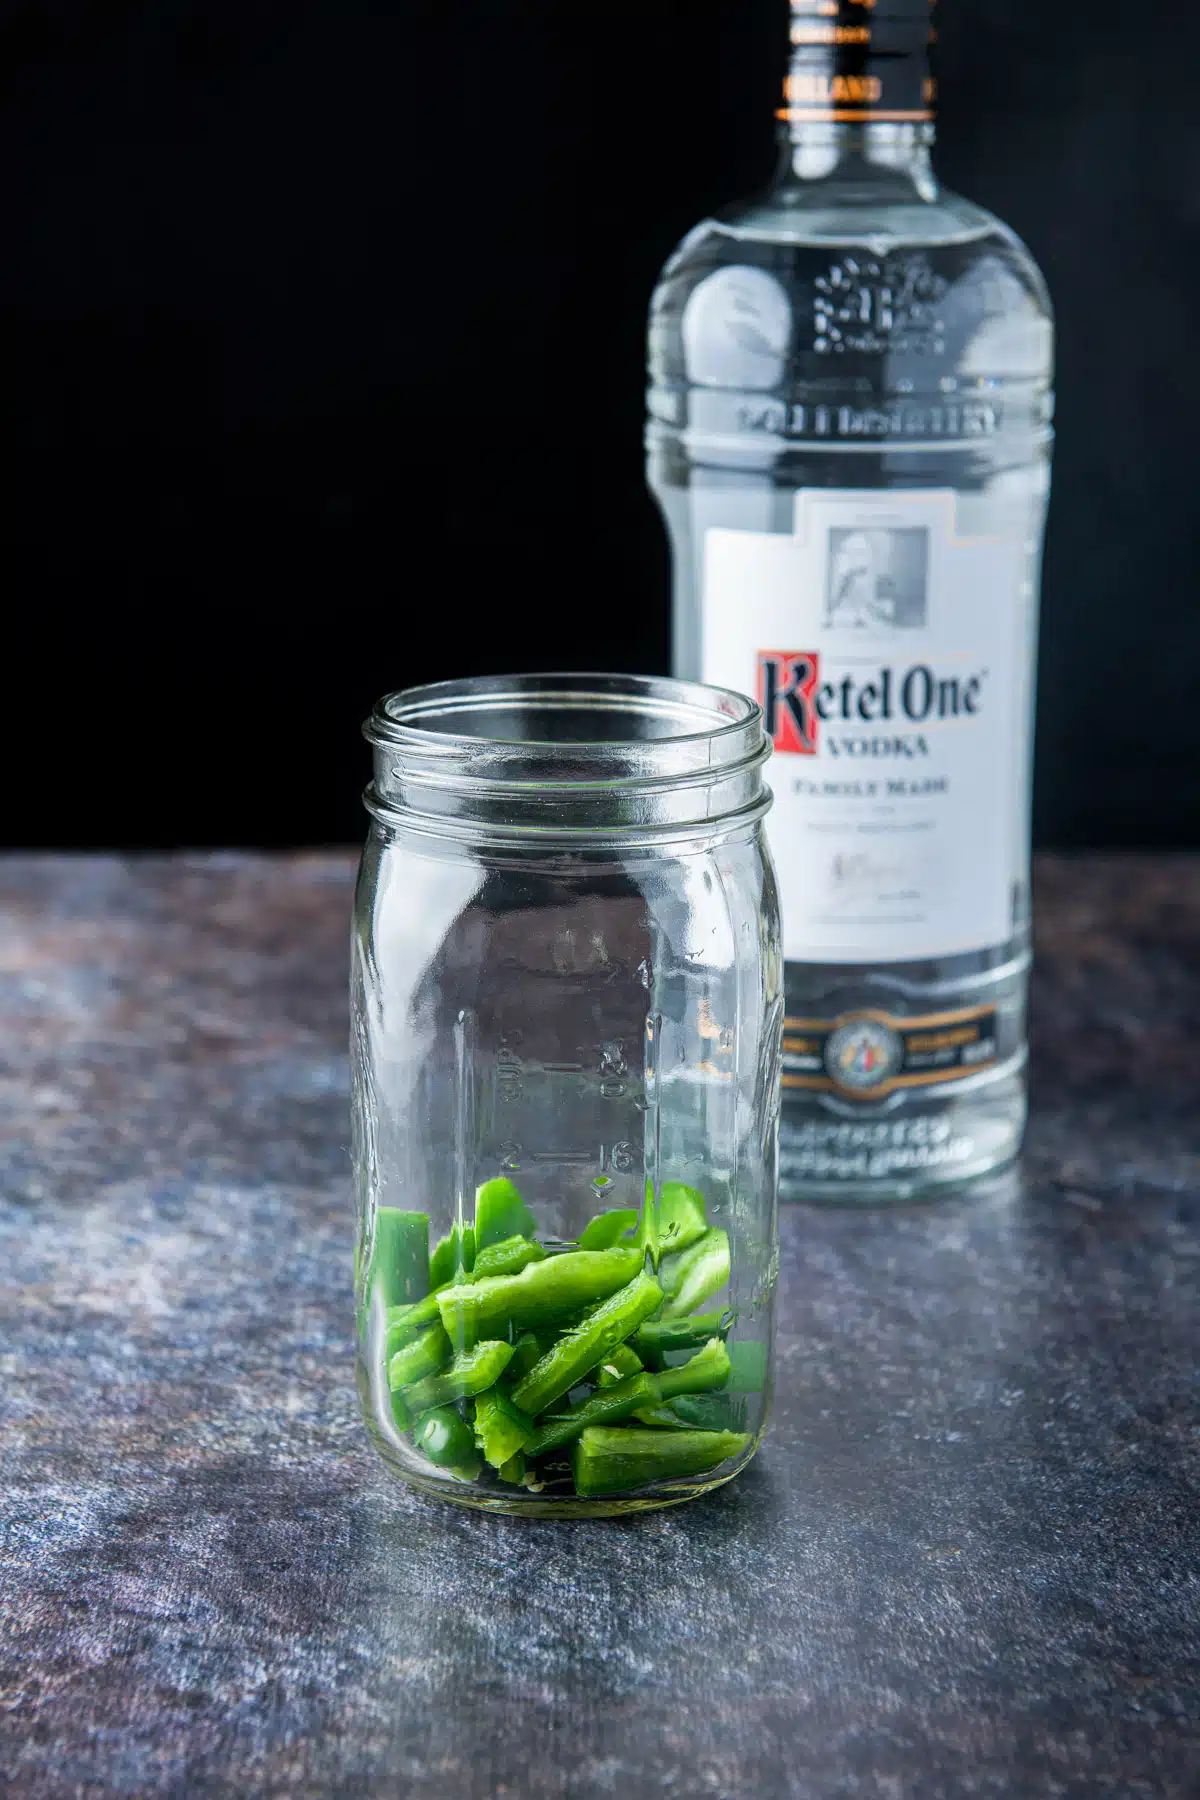 Jalapeno cut up, deseeded, and put in the jar with vodka in the background